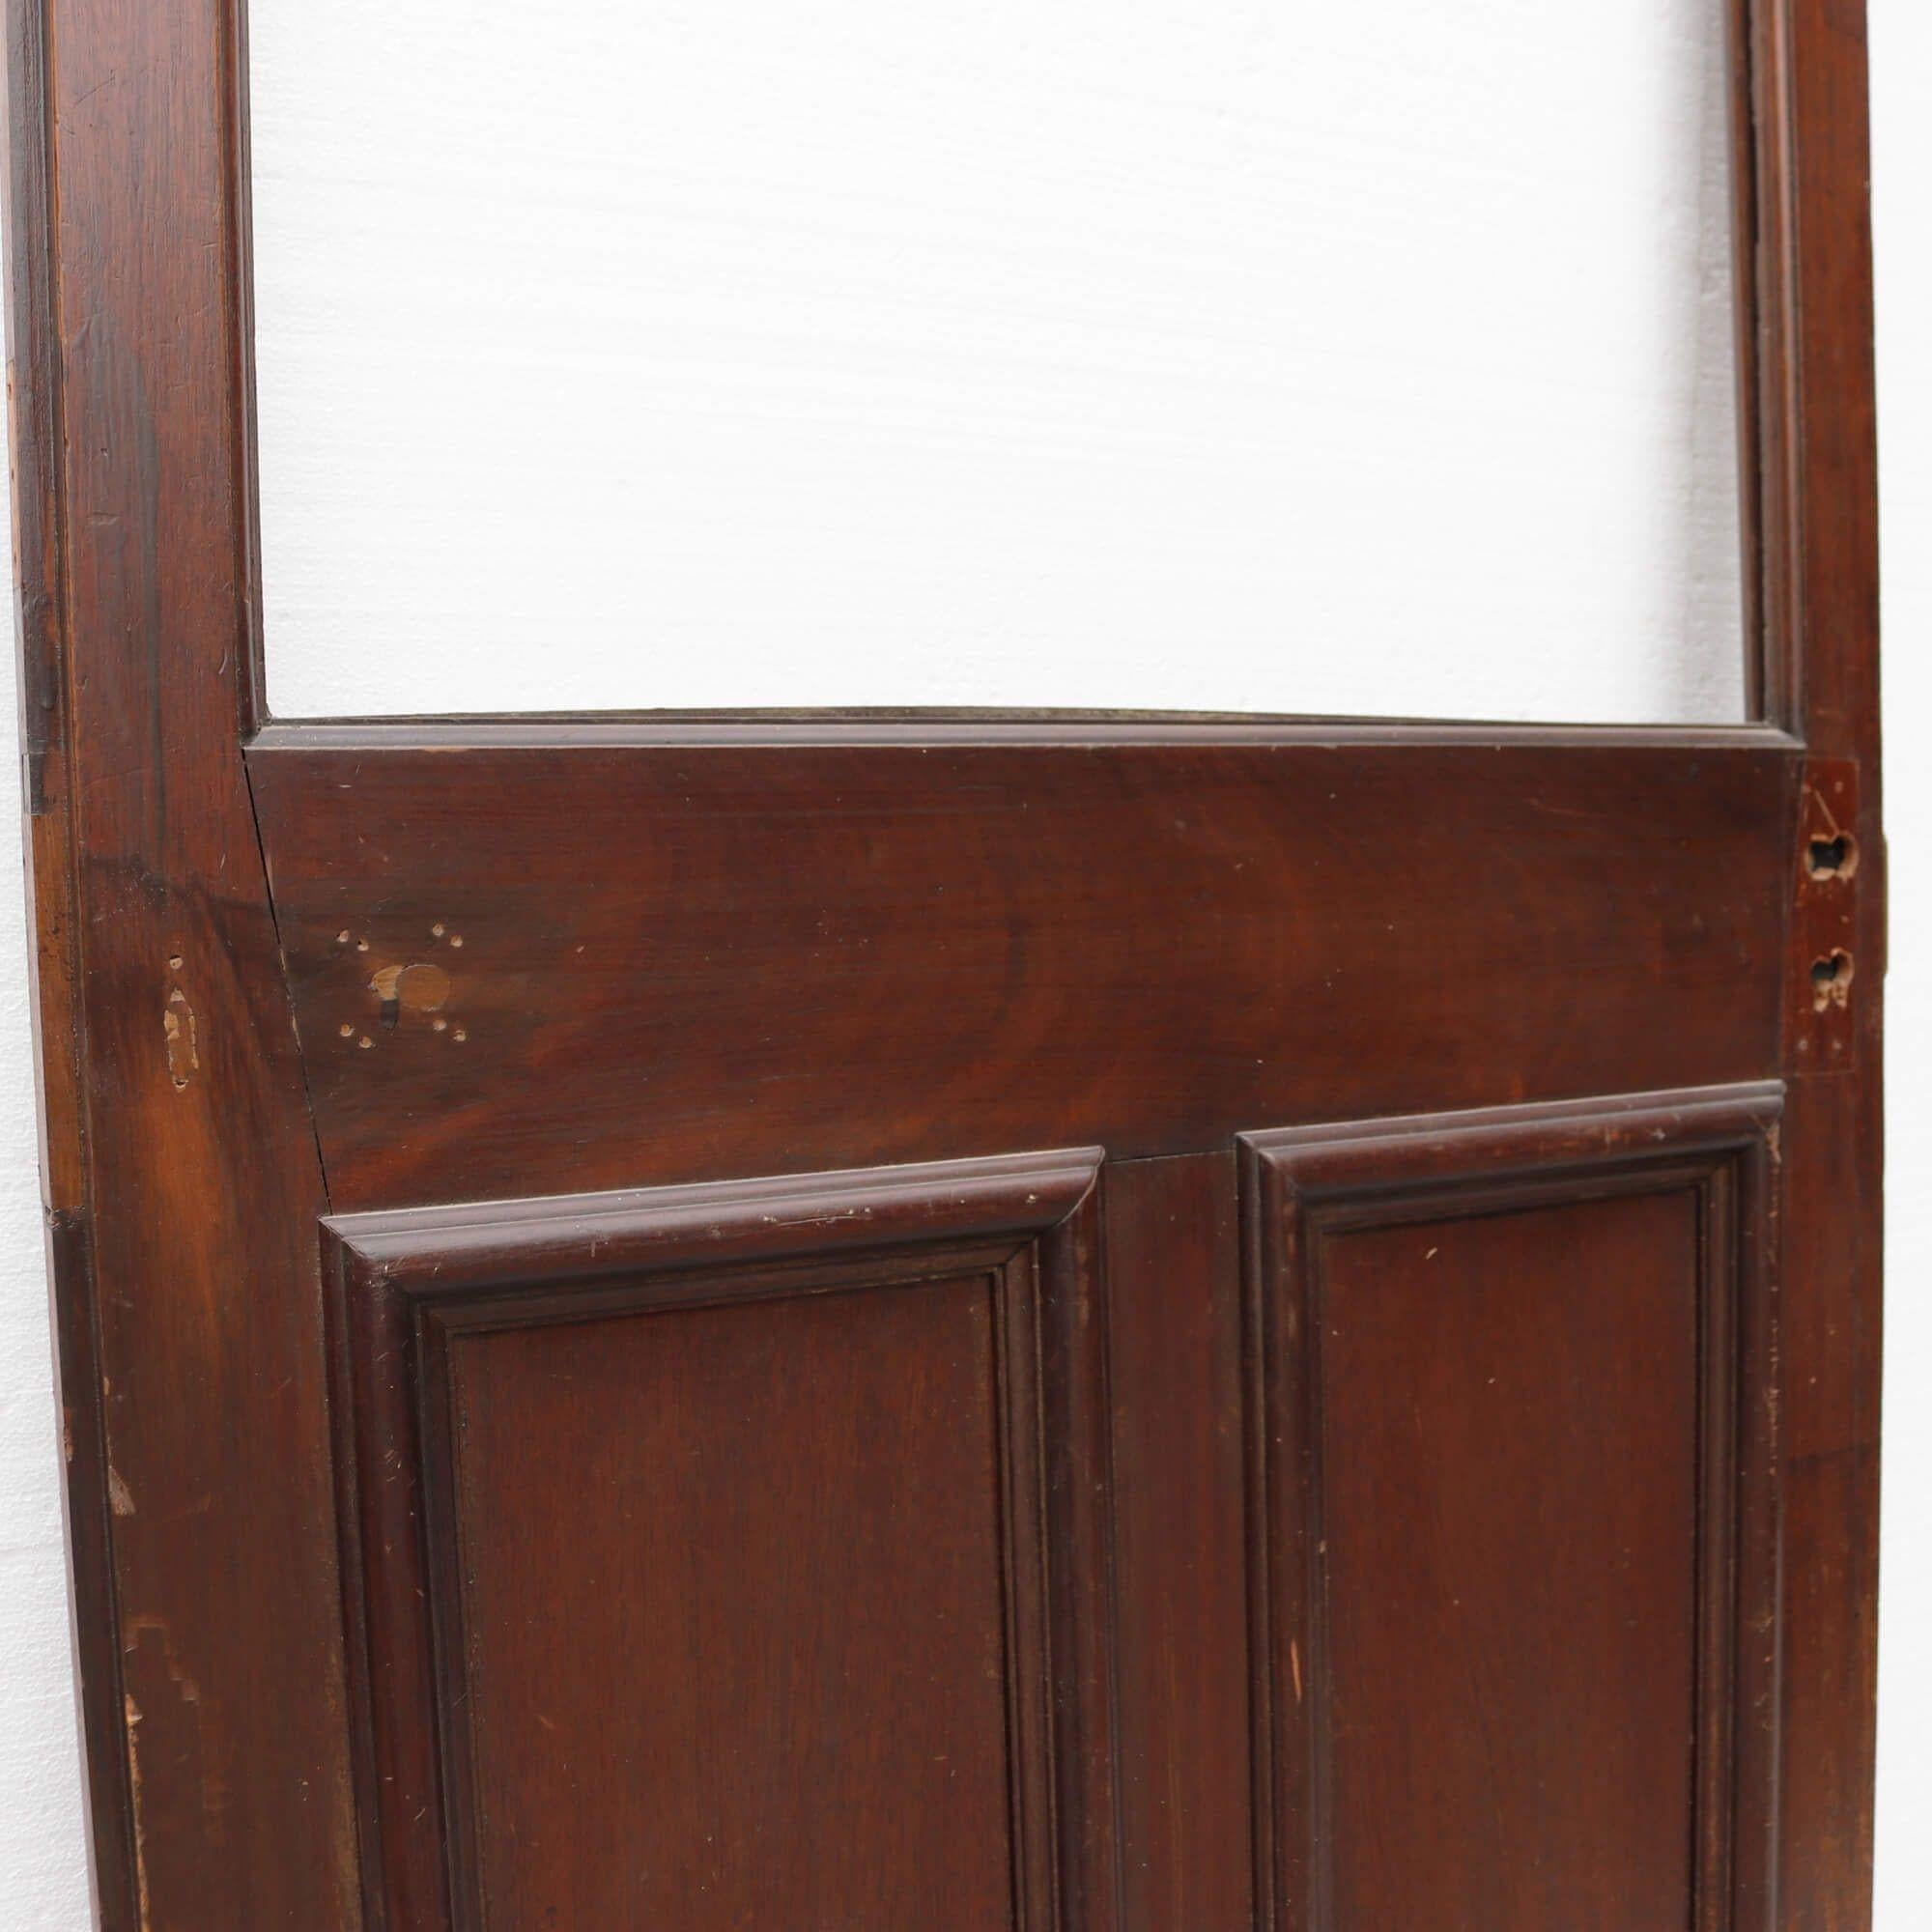 Unglazed Reclaimed Mahogany Door In Fair Condition For Sale In Wormelow, Herefordshire